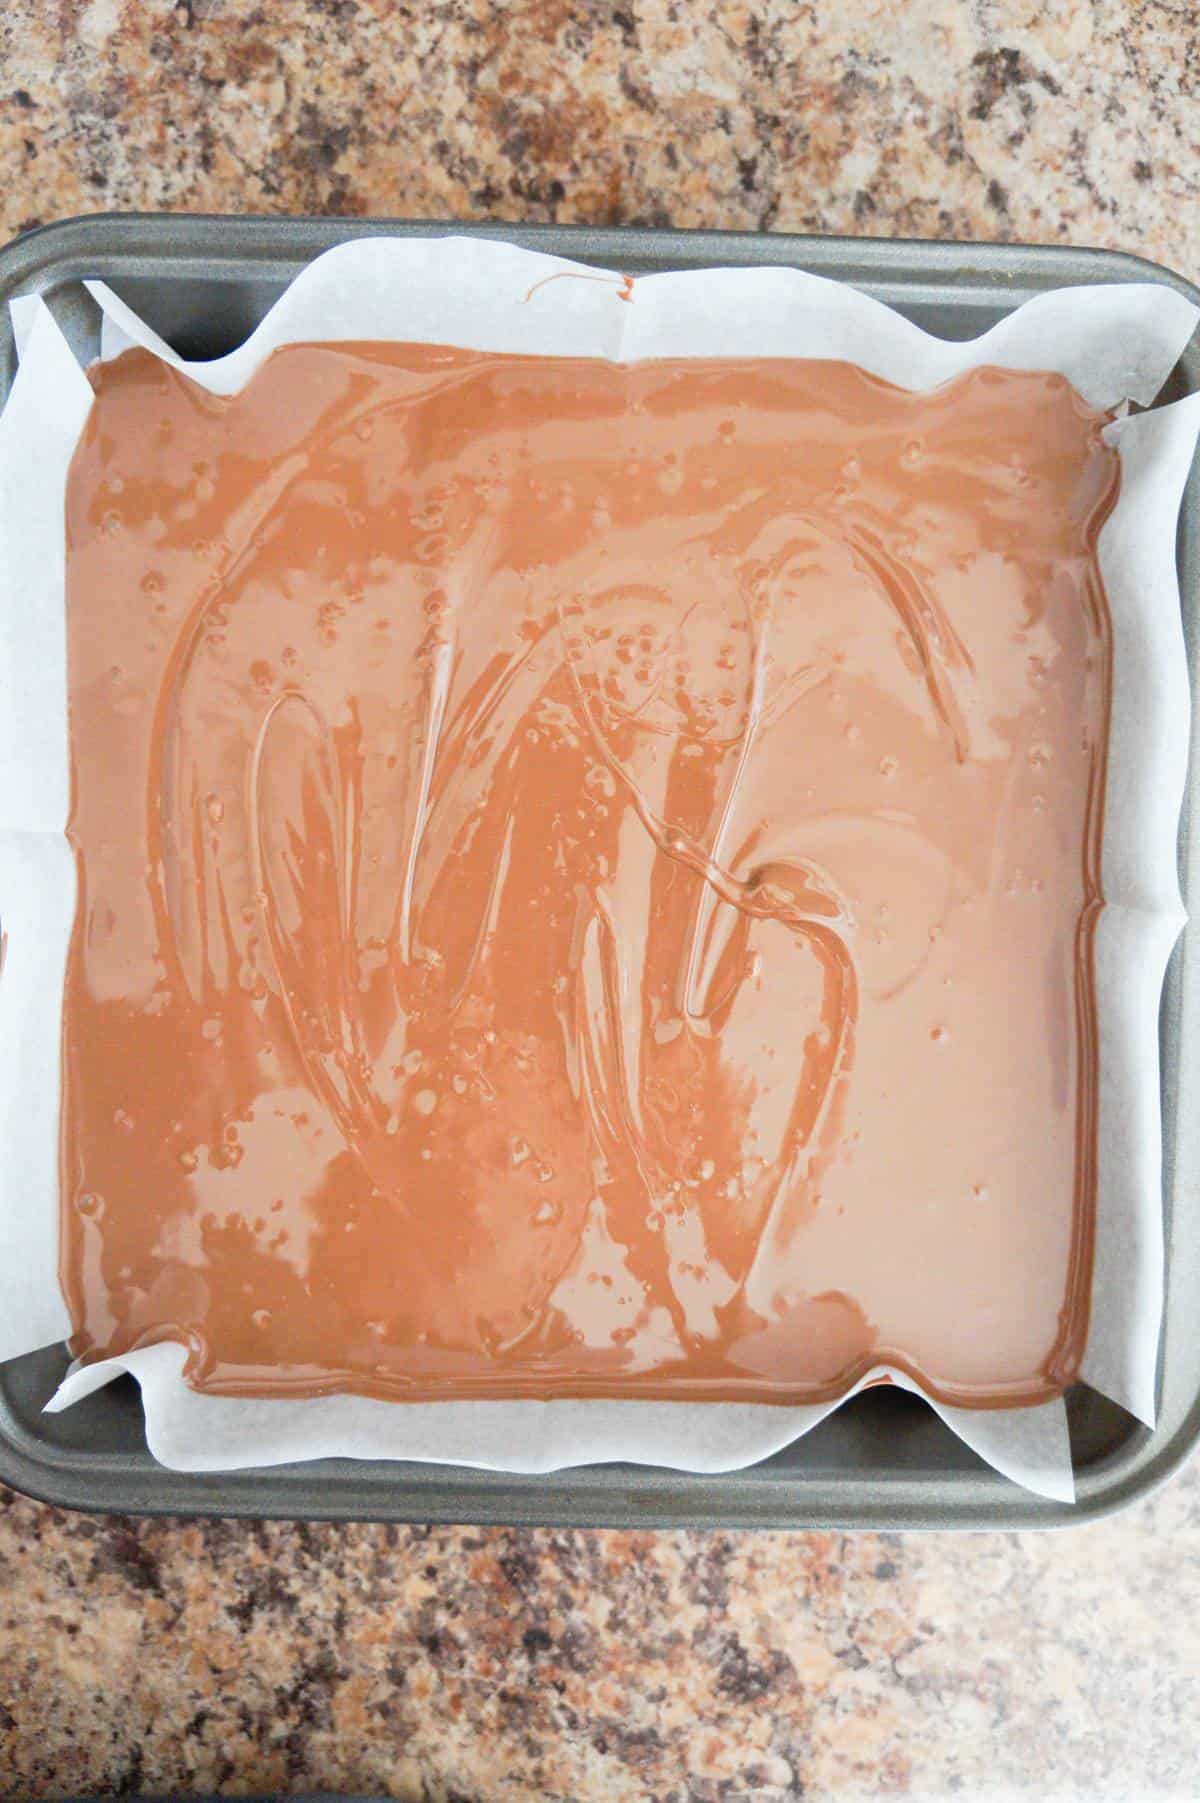 melted Nutella and milk chocolate mixture in a parchment lined baking pan